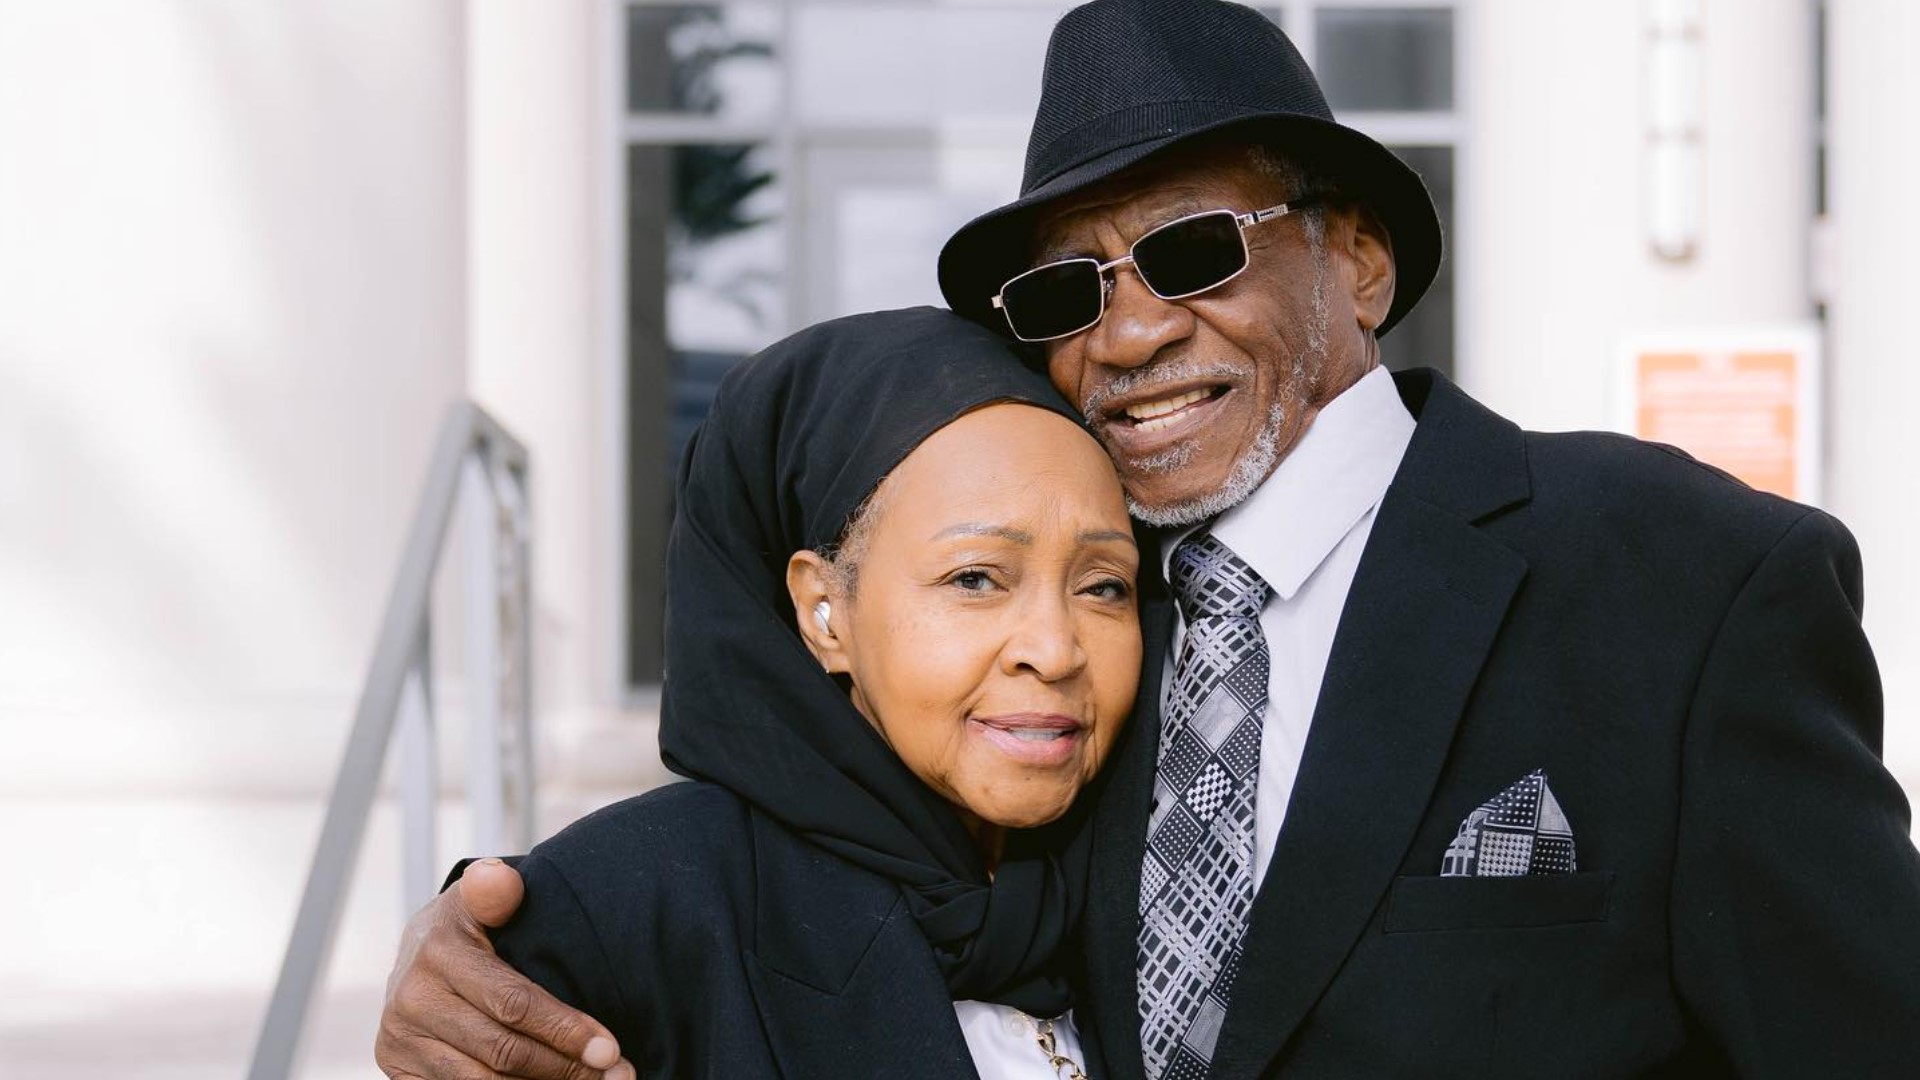 Willie Williams was wrongfully imprisoned for 45 years. He is looking for monetary relief, saying that the Jacksonville Sheriff's Office framed him.